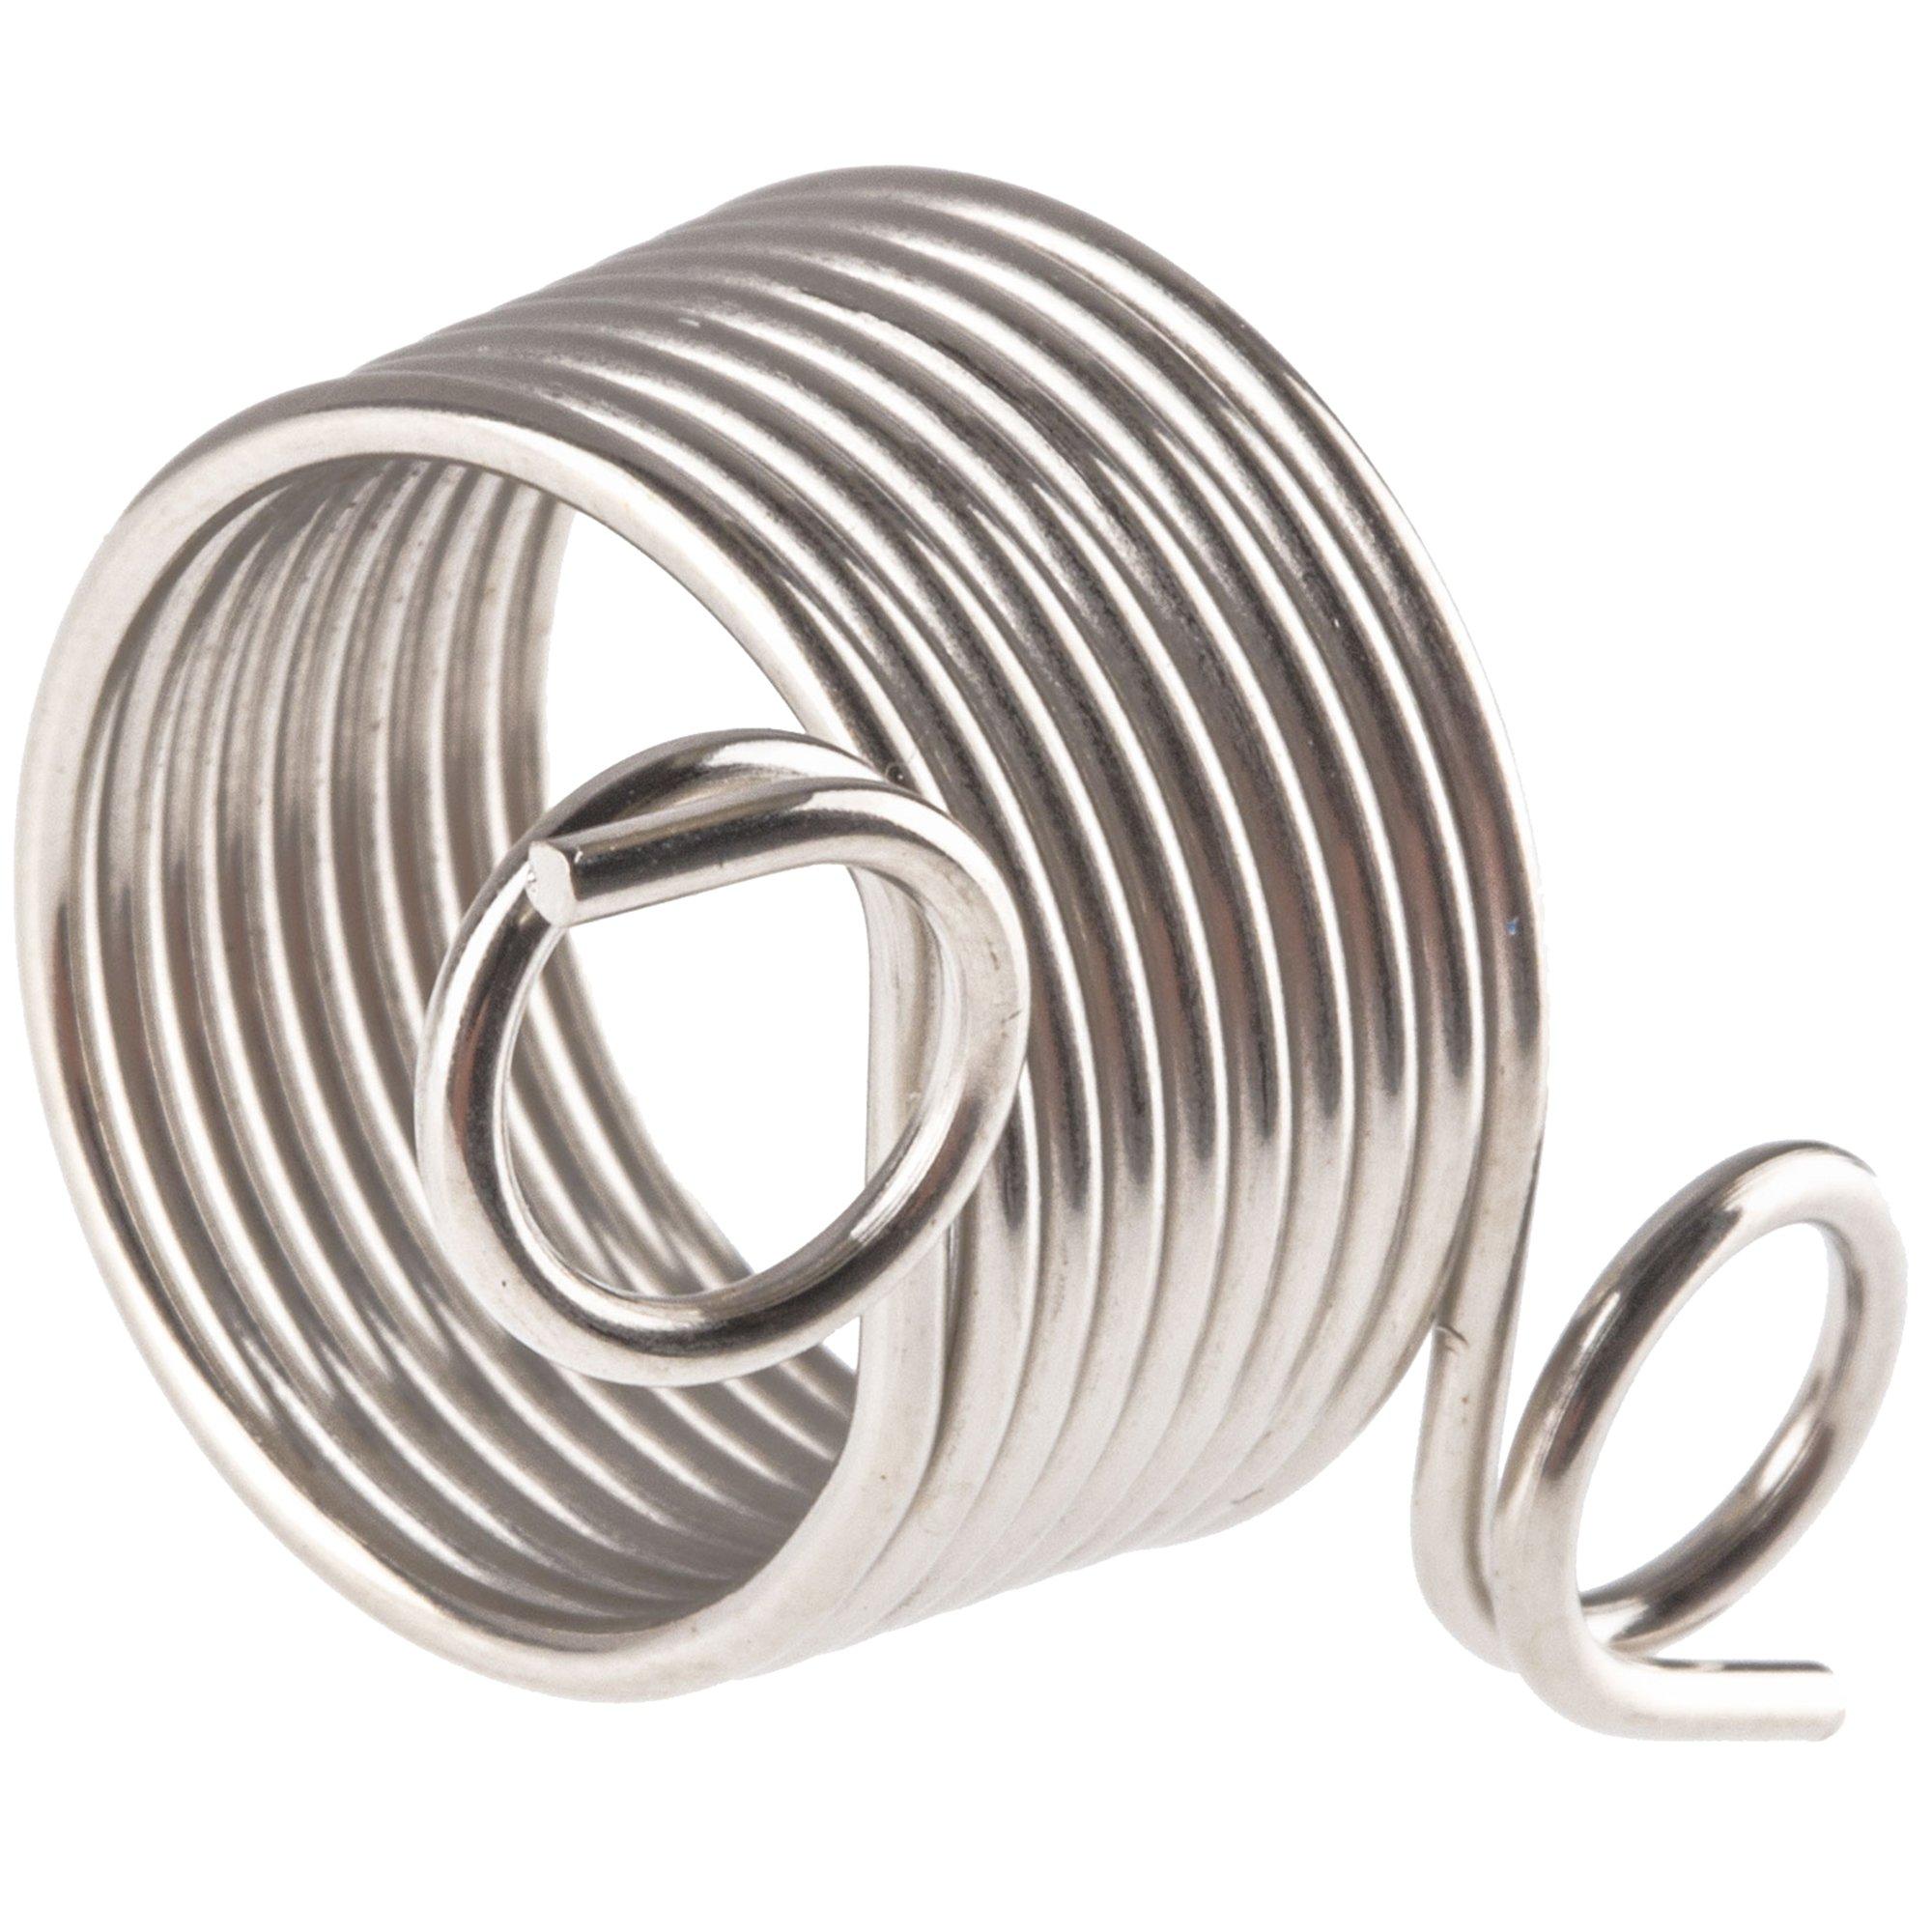 Knitting Ring for Colorwork Stainless Steel Yarn Guide Ring